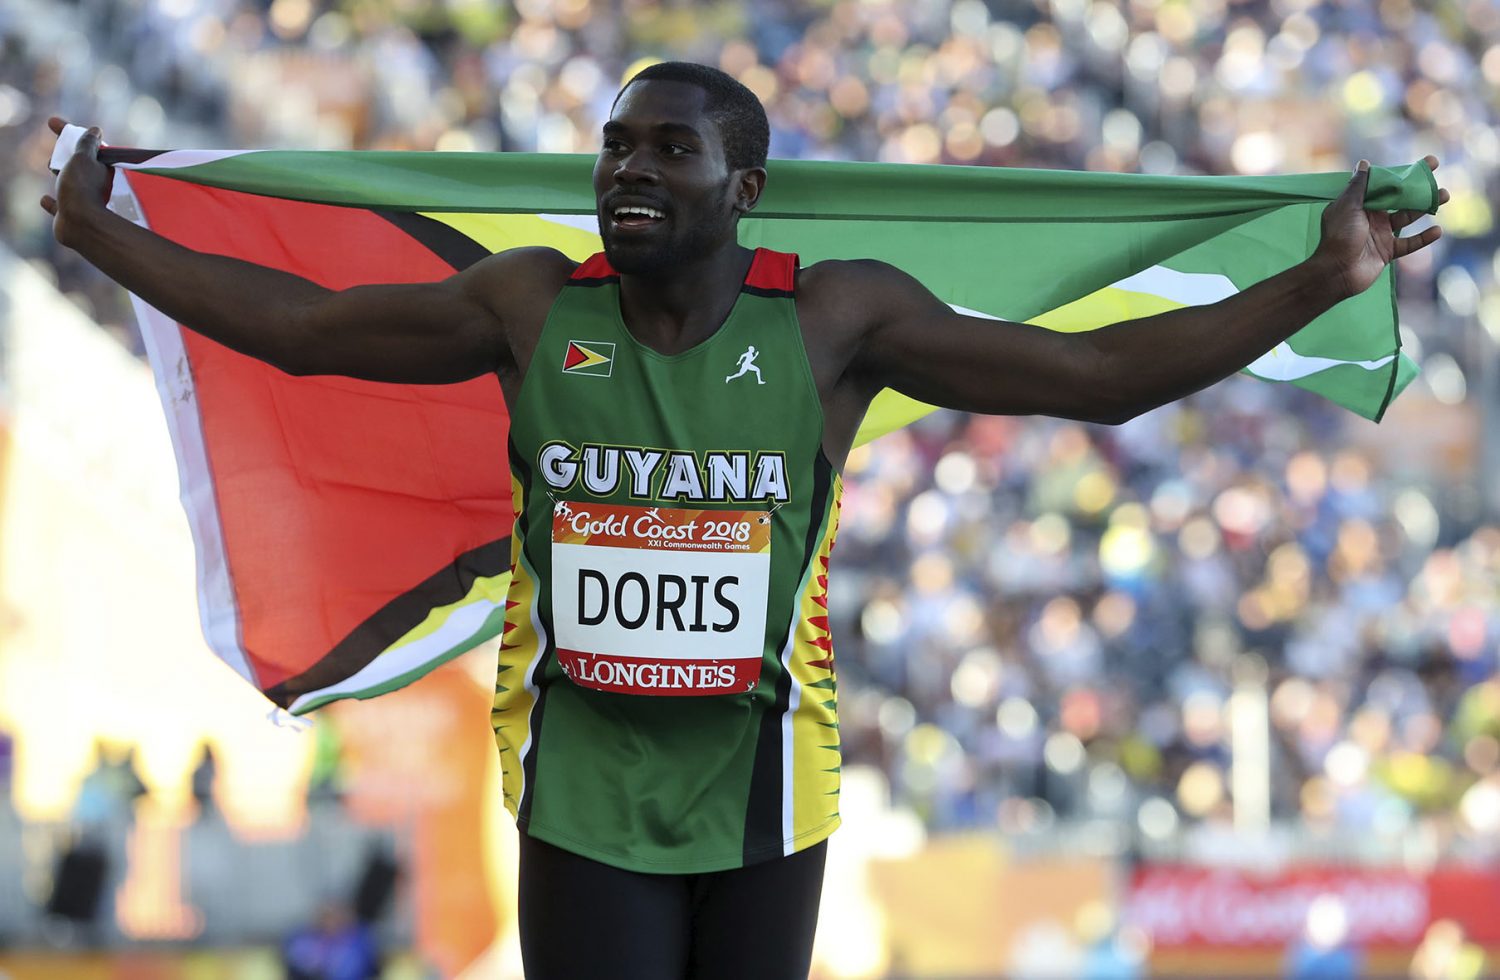 Guyana’s Troy Doris celebrates after winning in the men’s triple jump final at Carrara Stadium during the 2018 Commonwealth Games on the Gold Coast, Australia, Saturday, April 14, 2018. (AP Photo/Mark Schiefelbein)